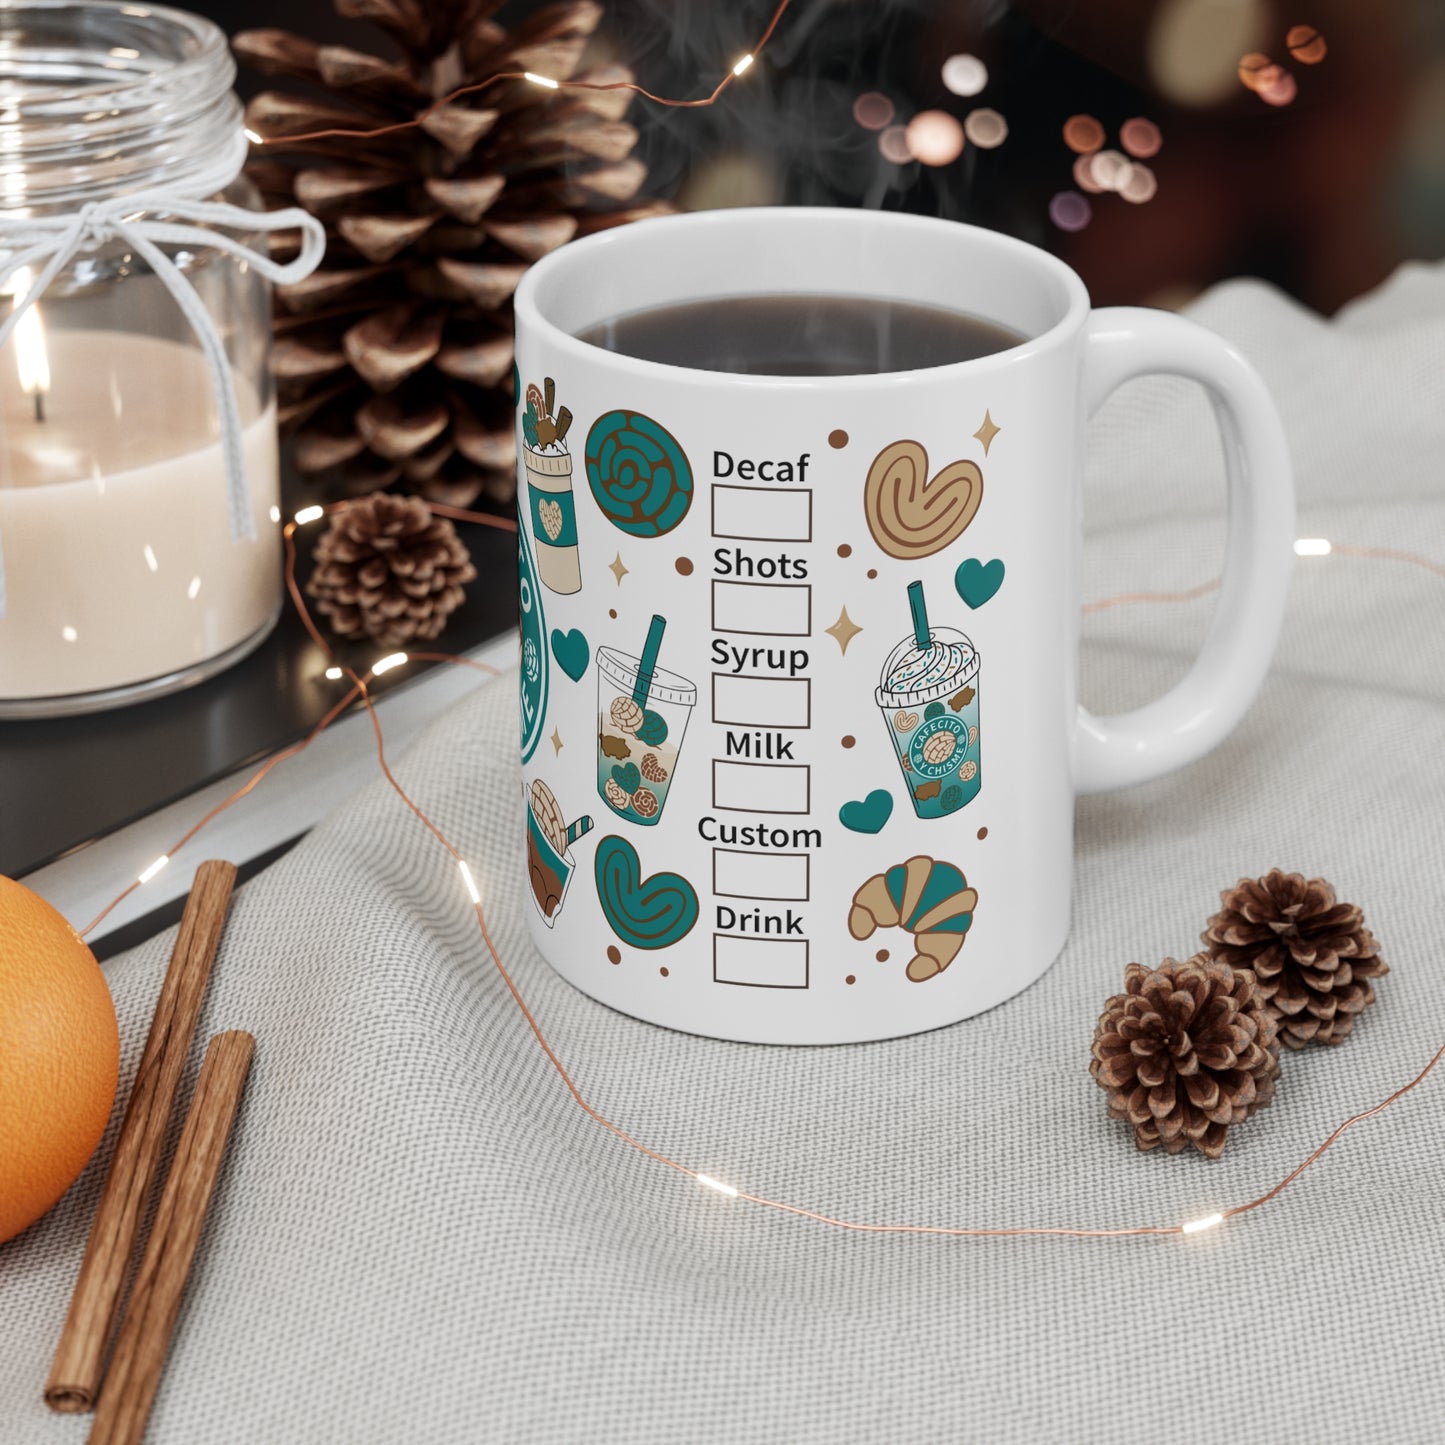 cafecito y chisme Ceramic Mug 11oz for comadre, ahijada or Mexican best friend. Navidad gift for her.